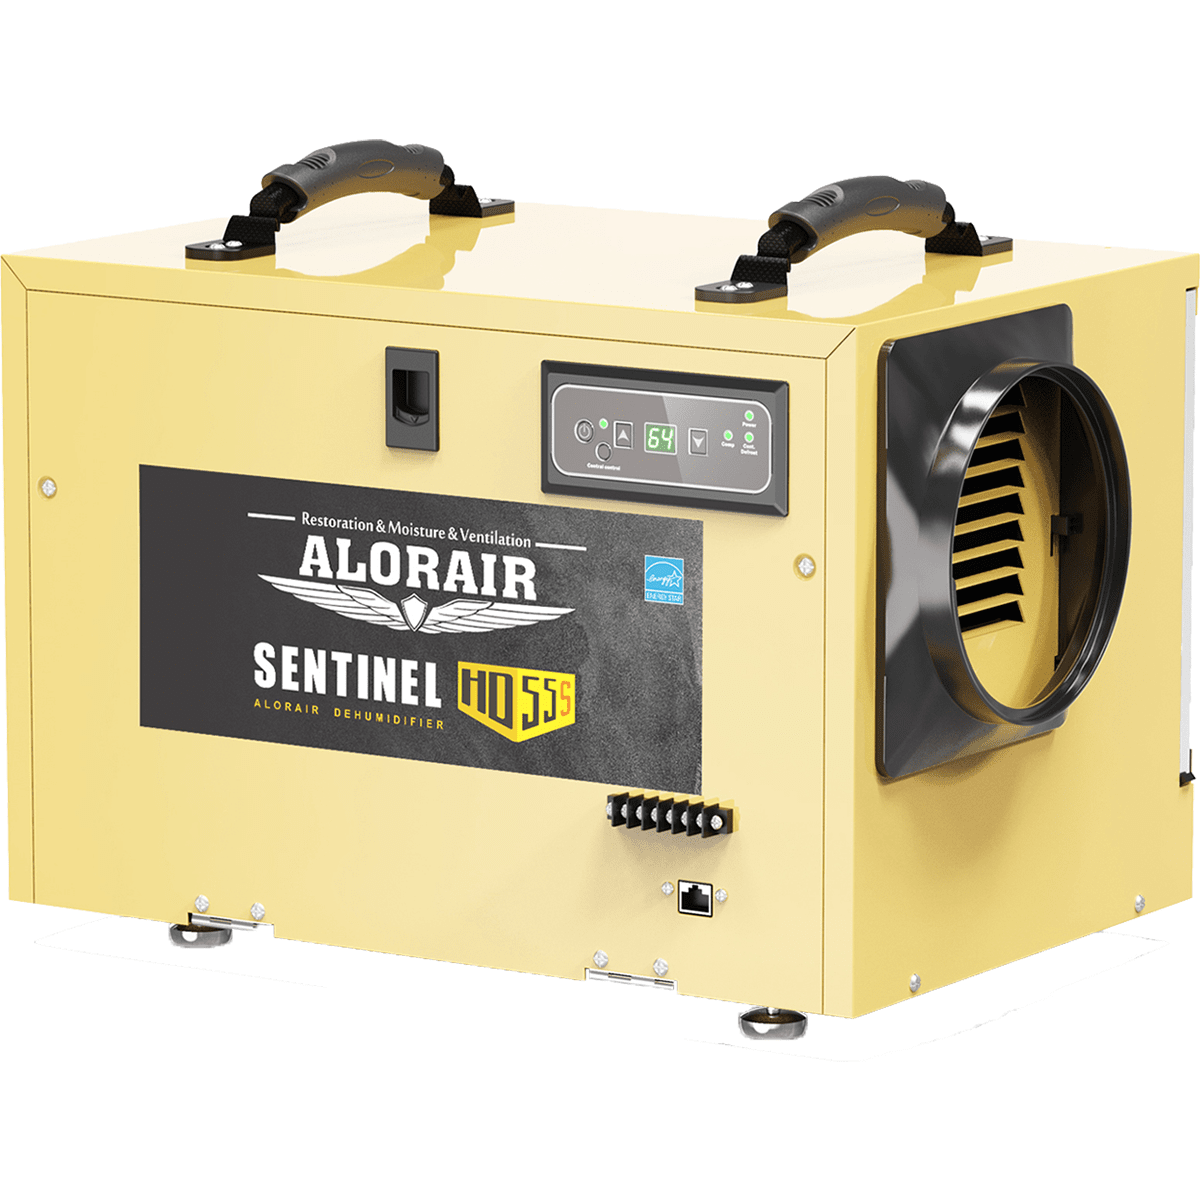 AlorAir Sentinel 55 Pint at AHAM Dehumidifier With Drain Hose for Crawl Spaces or Basements Up to 1,300 Sq. Ft., Gold